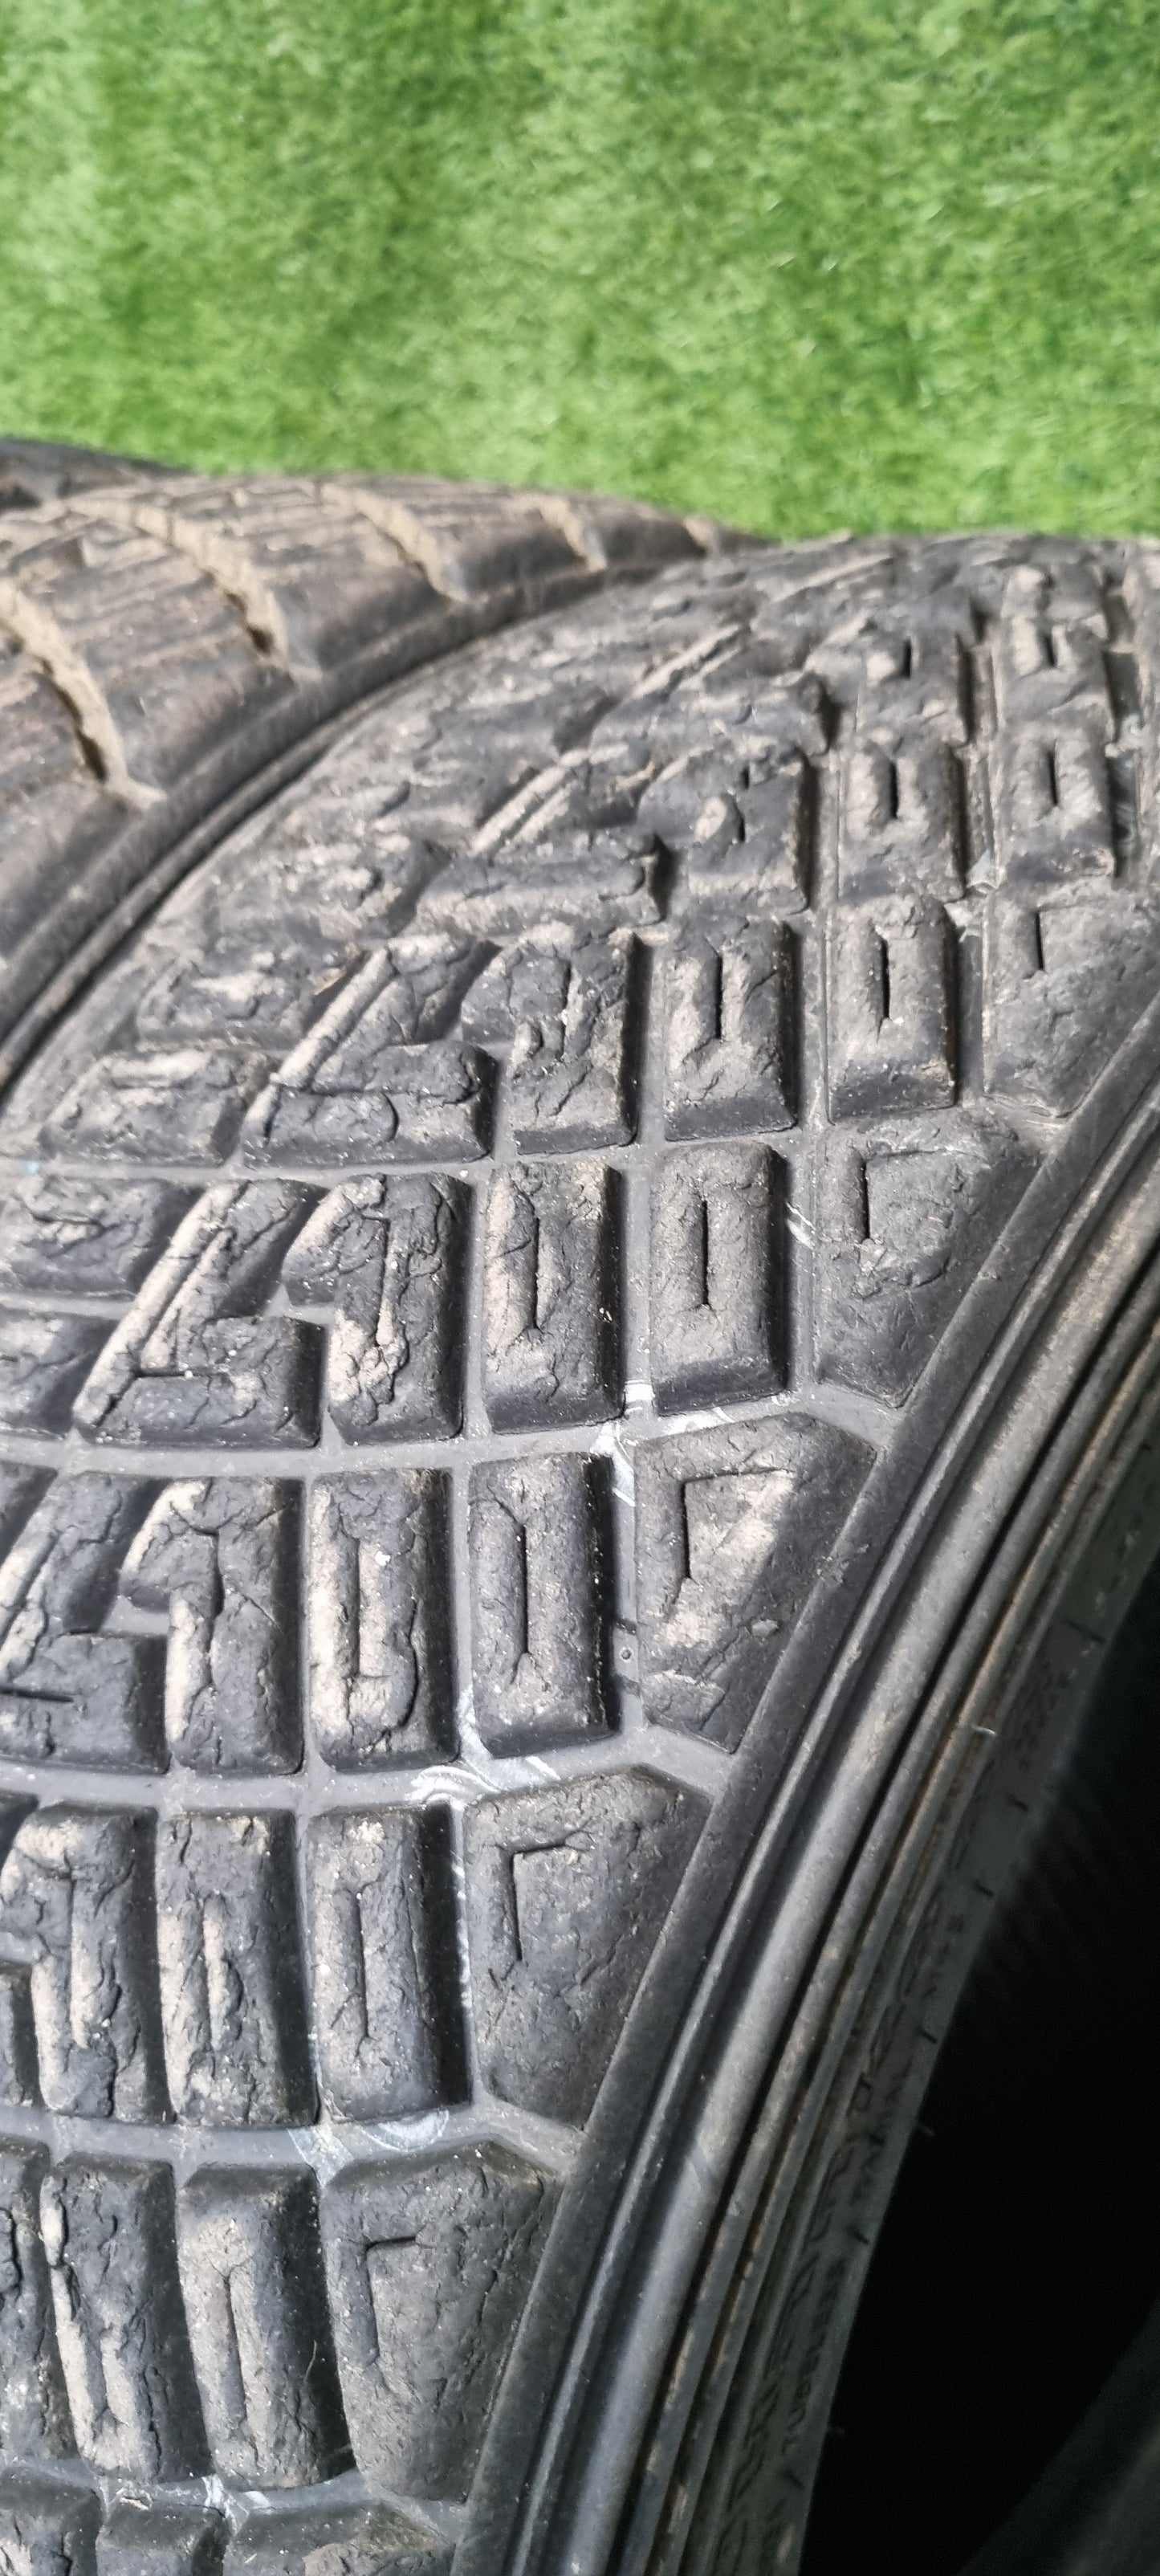 Hankook 170/65/15 Dynapro Rally Tyres G73 Compound. (Set of four tyres)